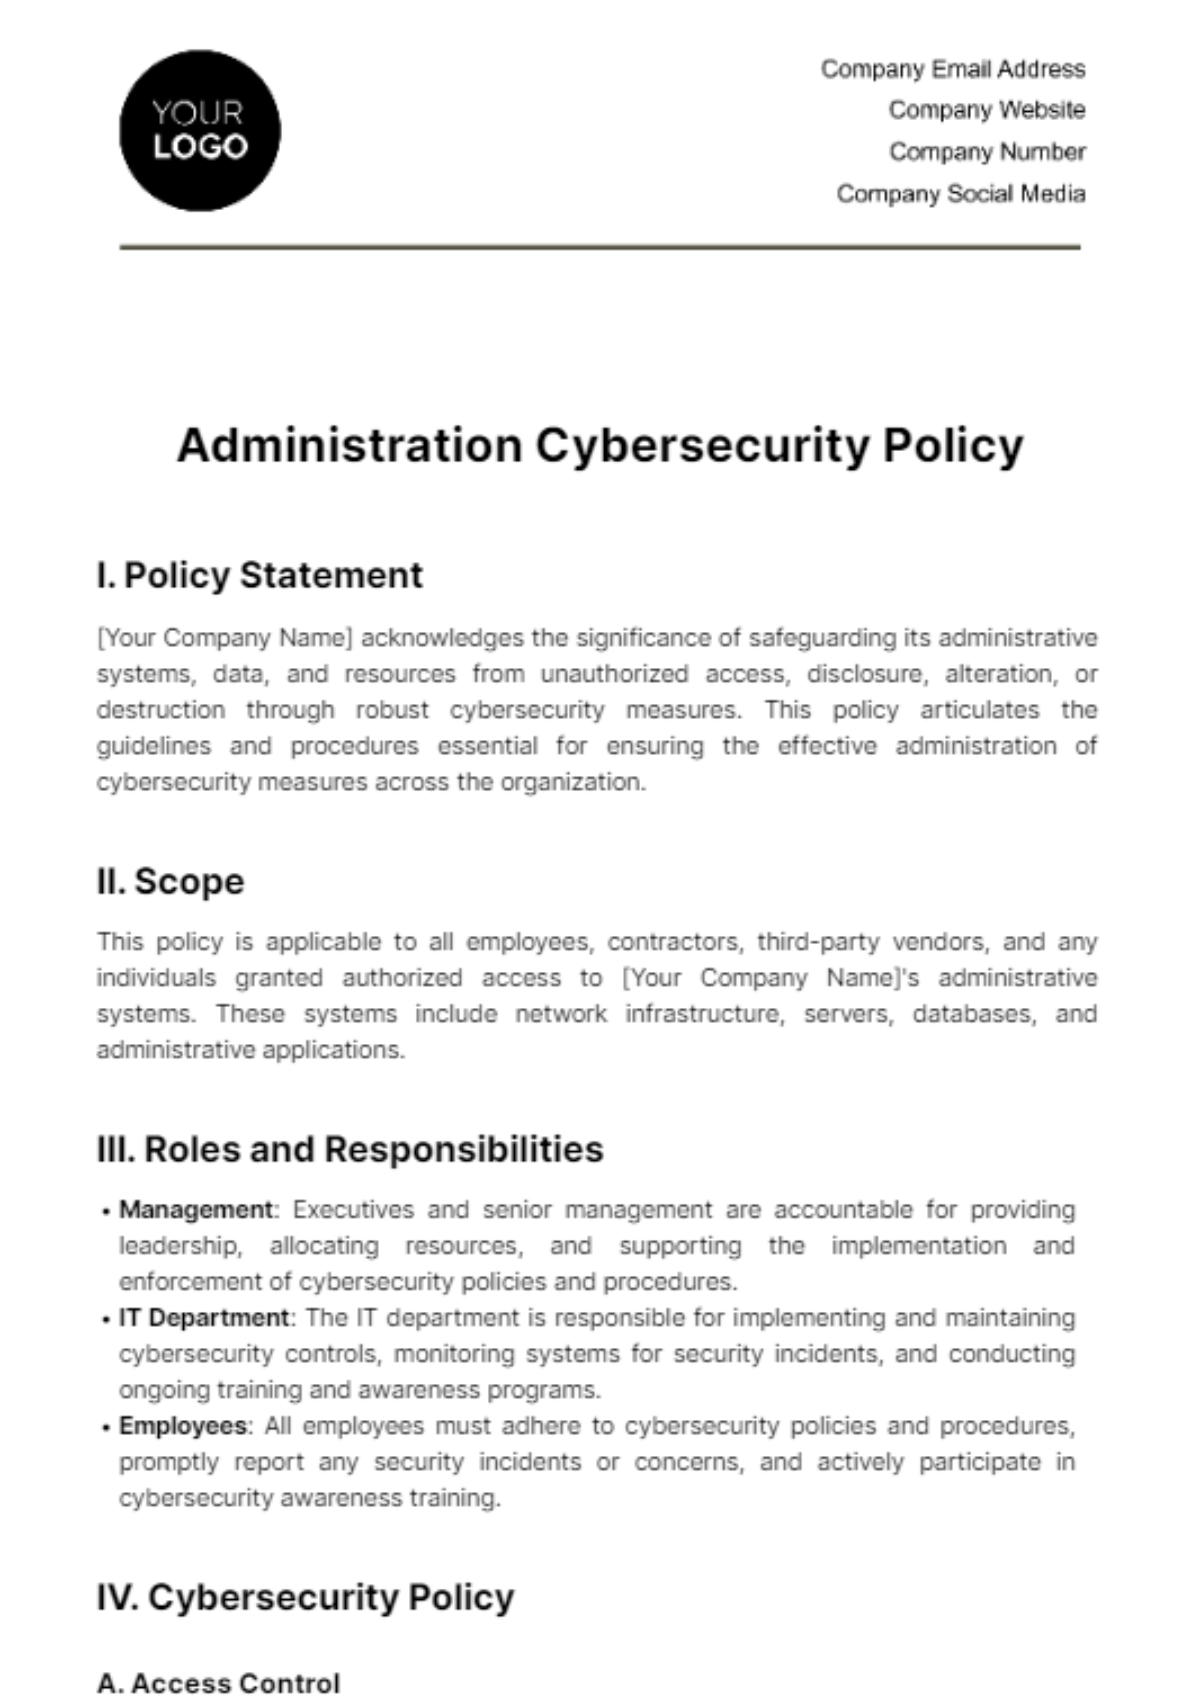 Administration Cybersecurity Policy Template